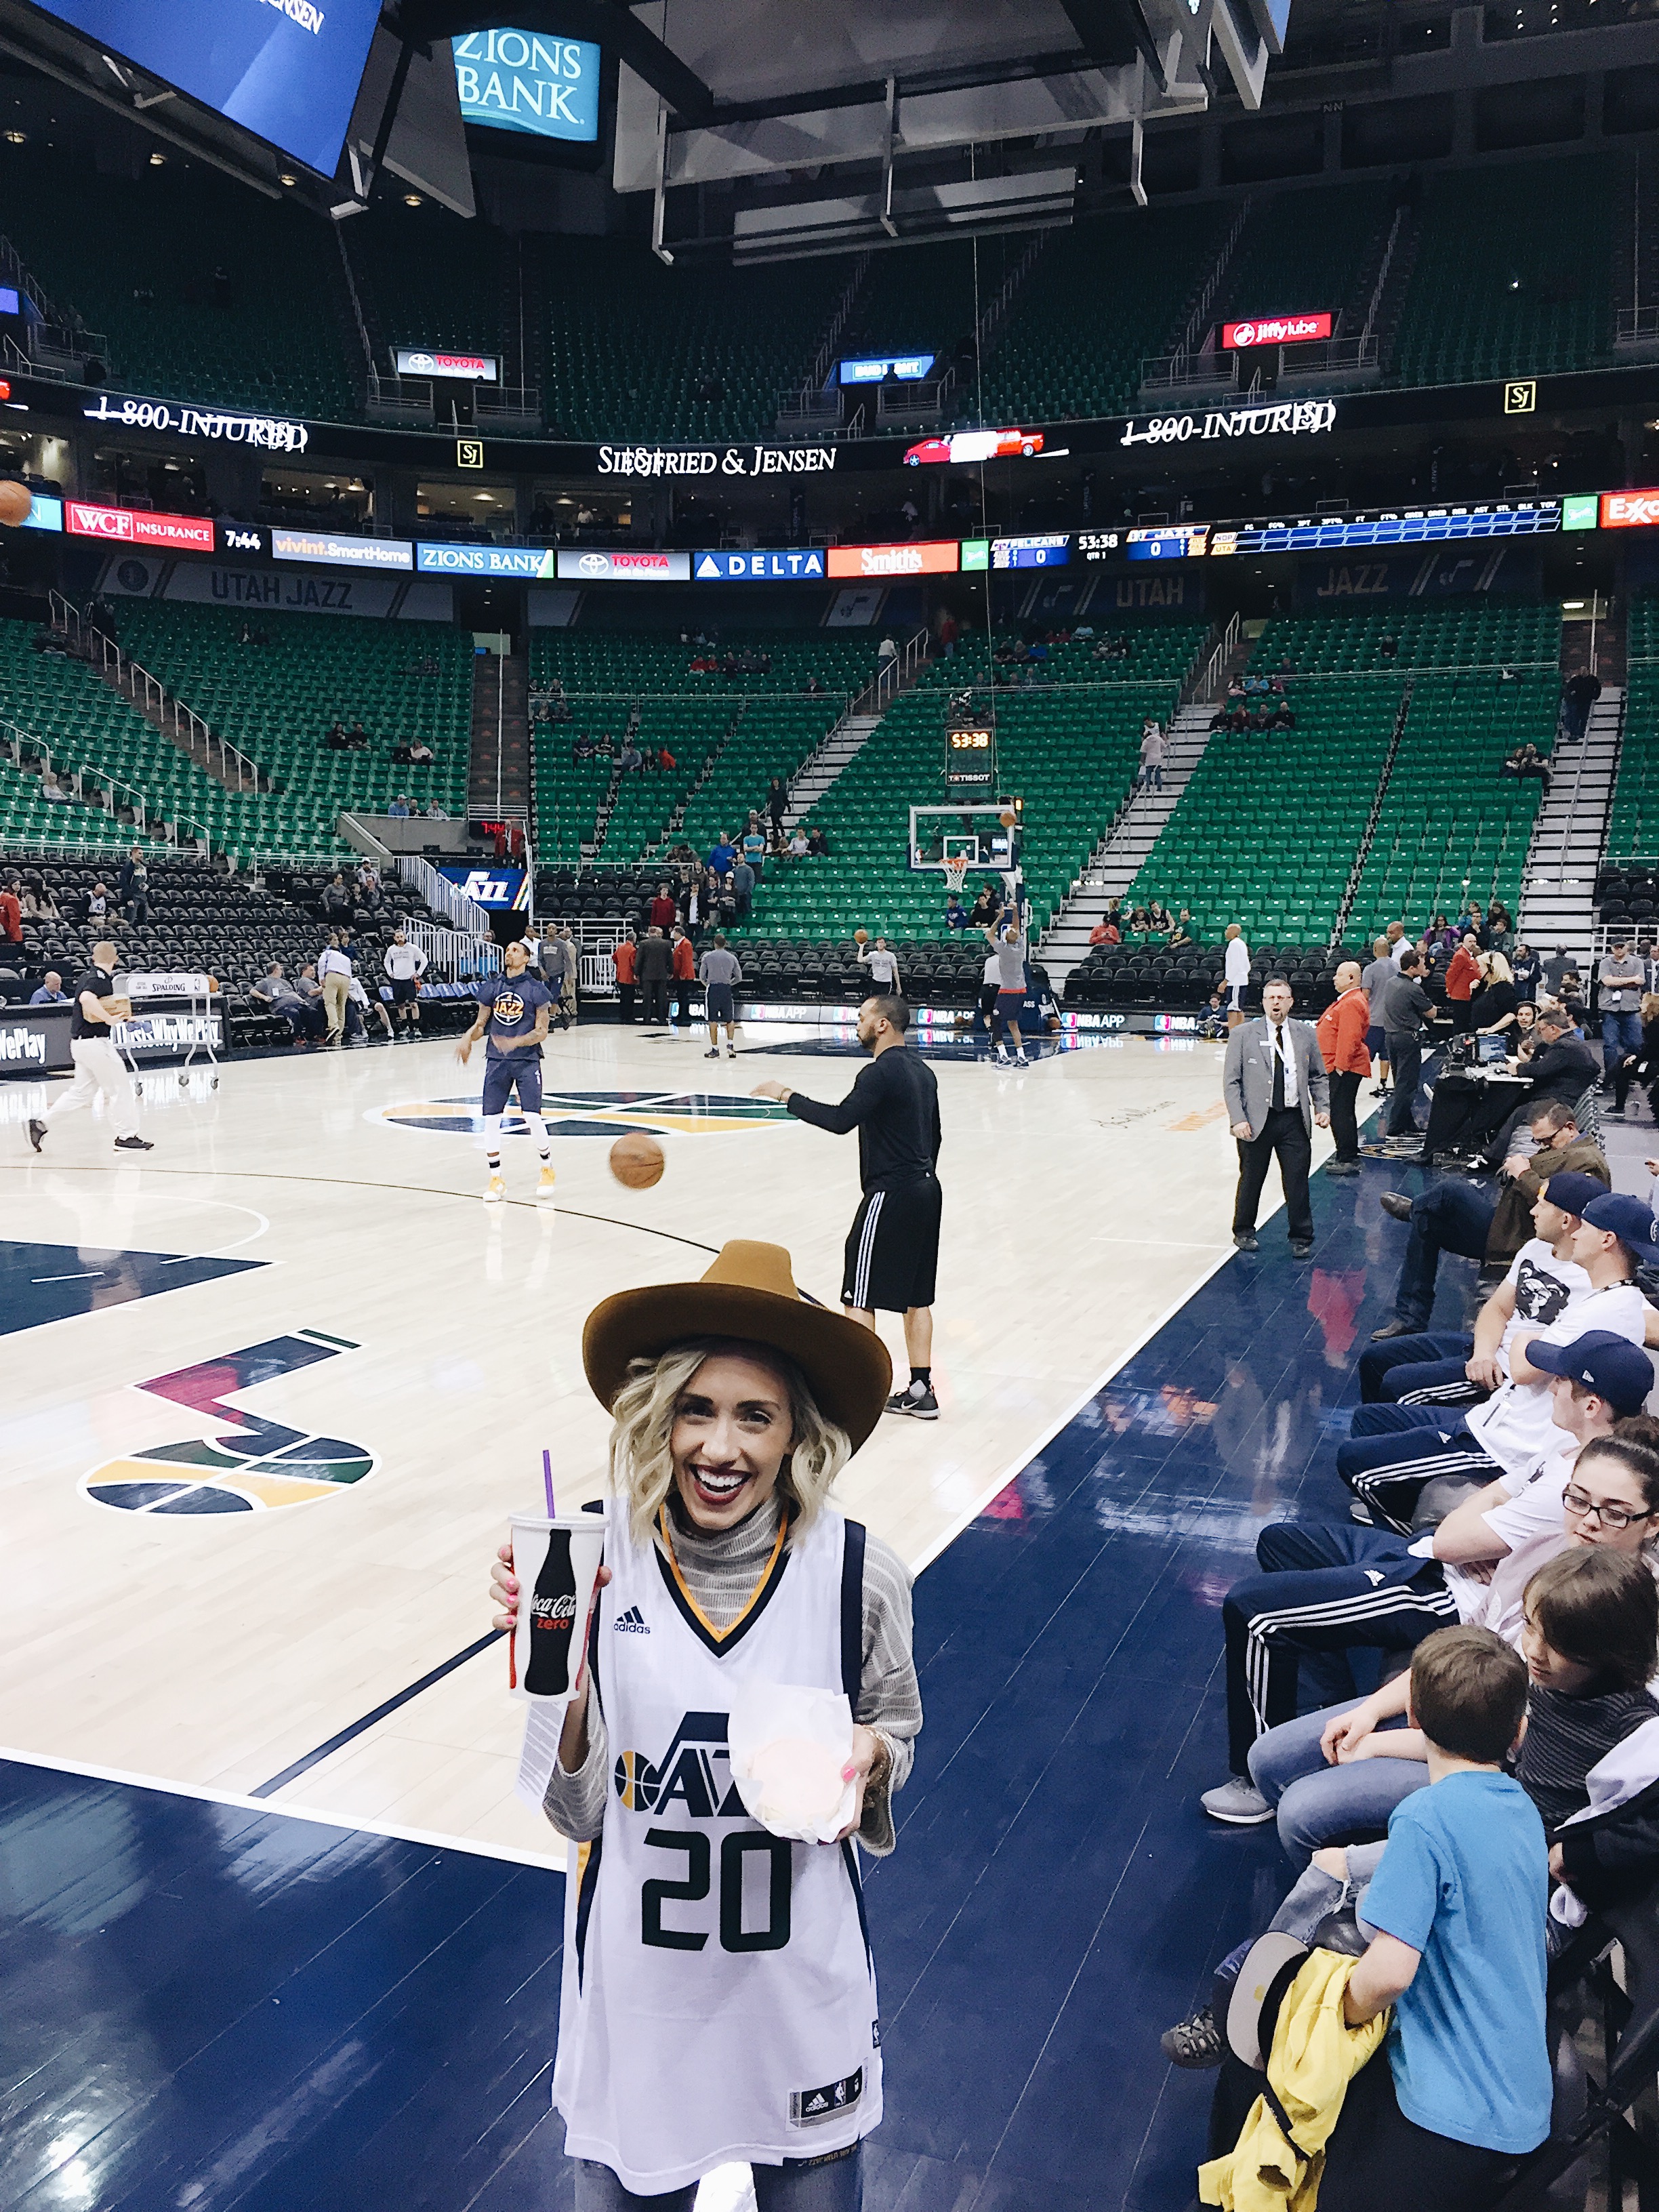 GO JAZZ GO!: A Fantastic Jazz Giveaway! by lifestyle blogger Ginger of the parrish place